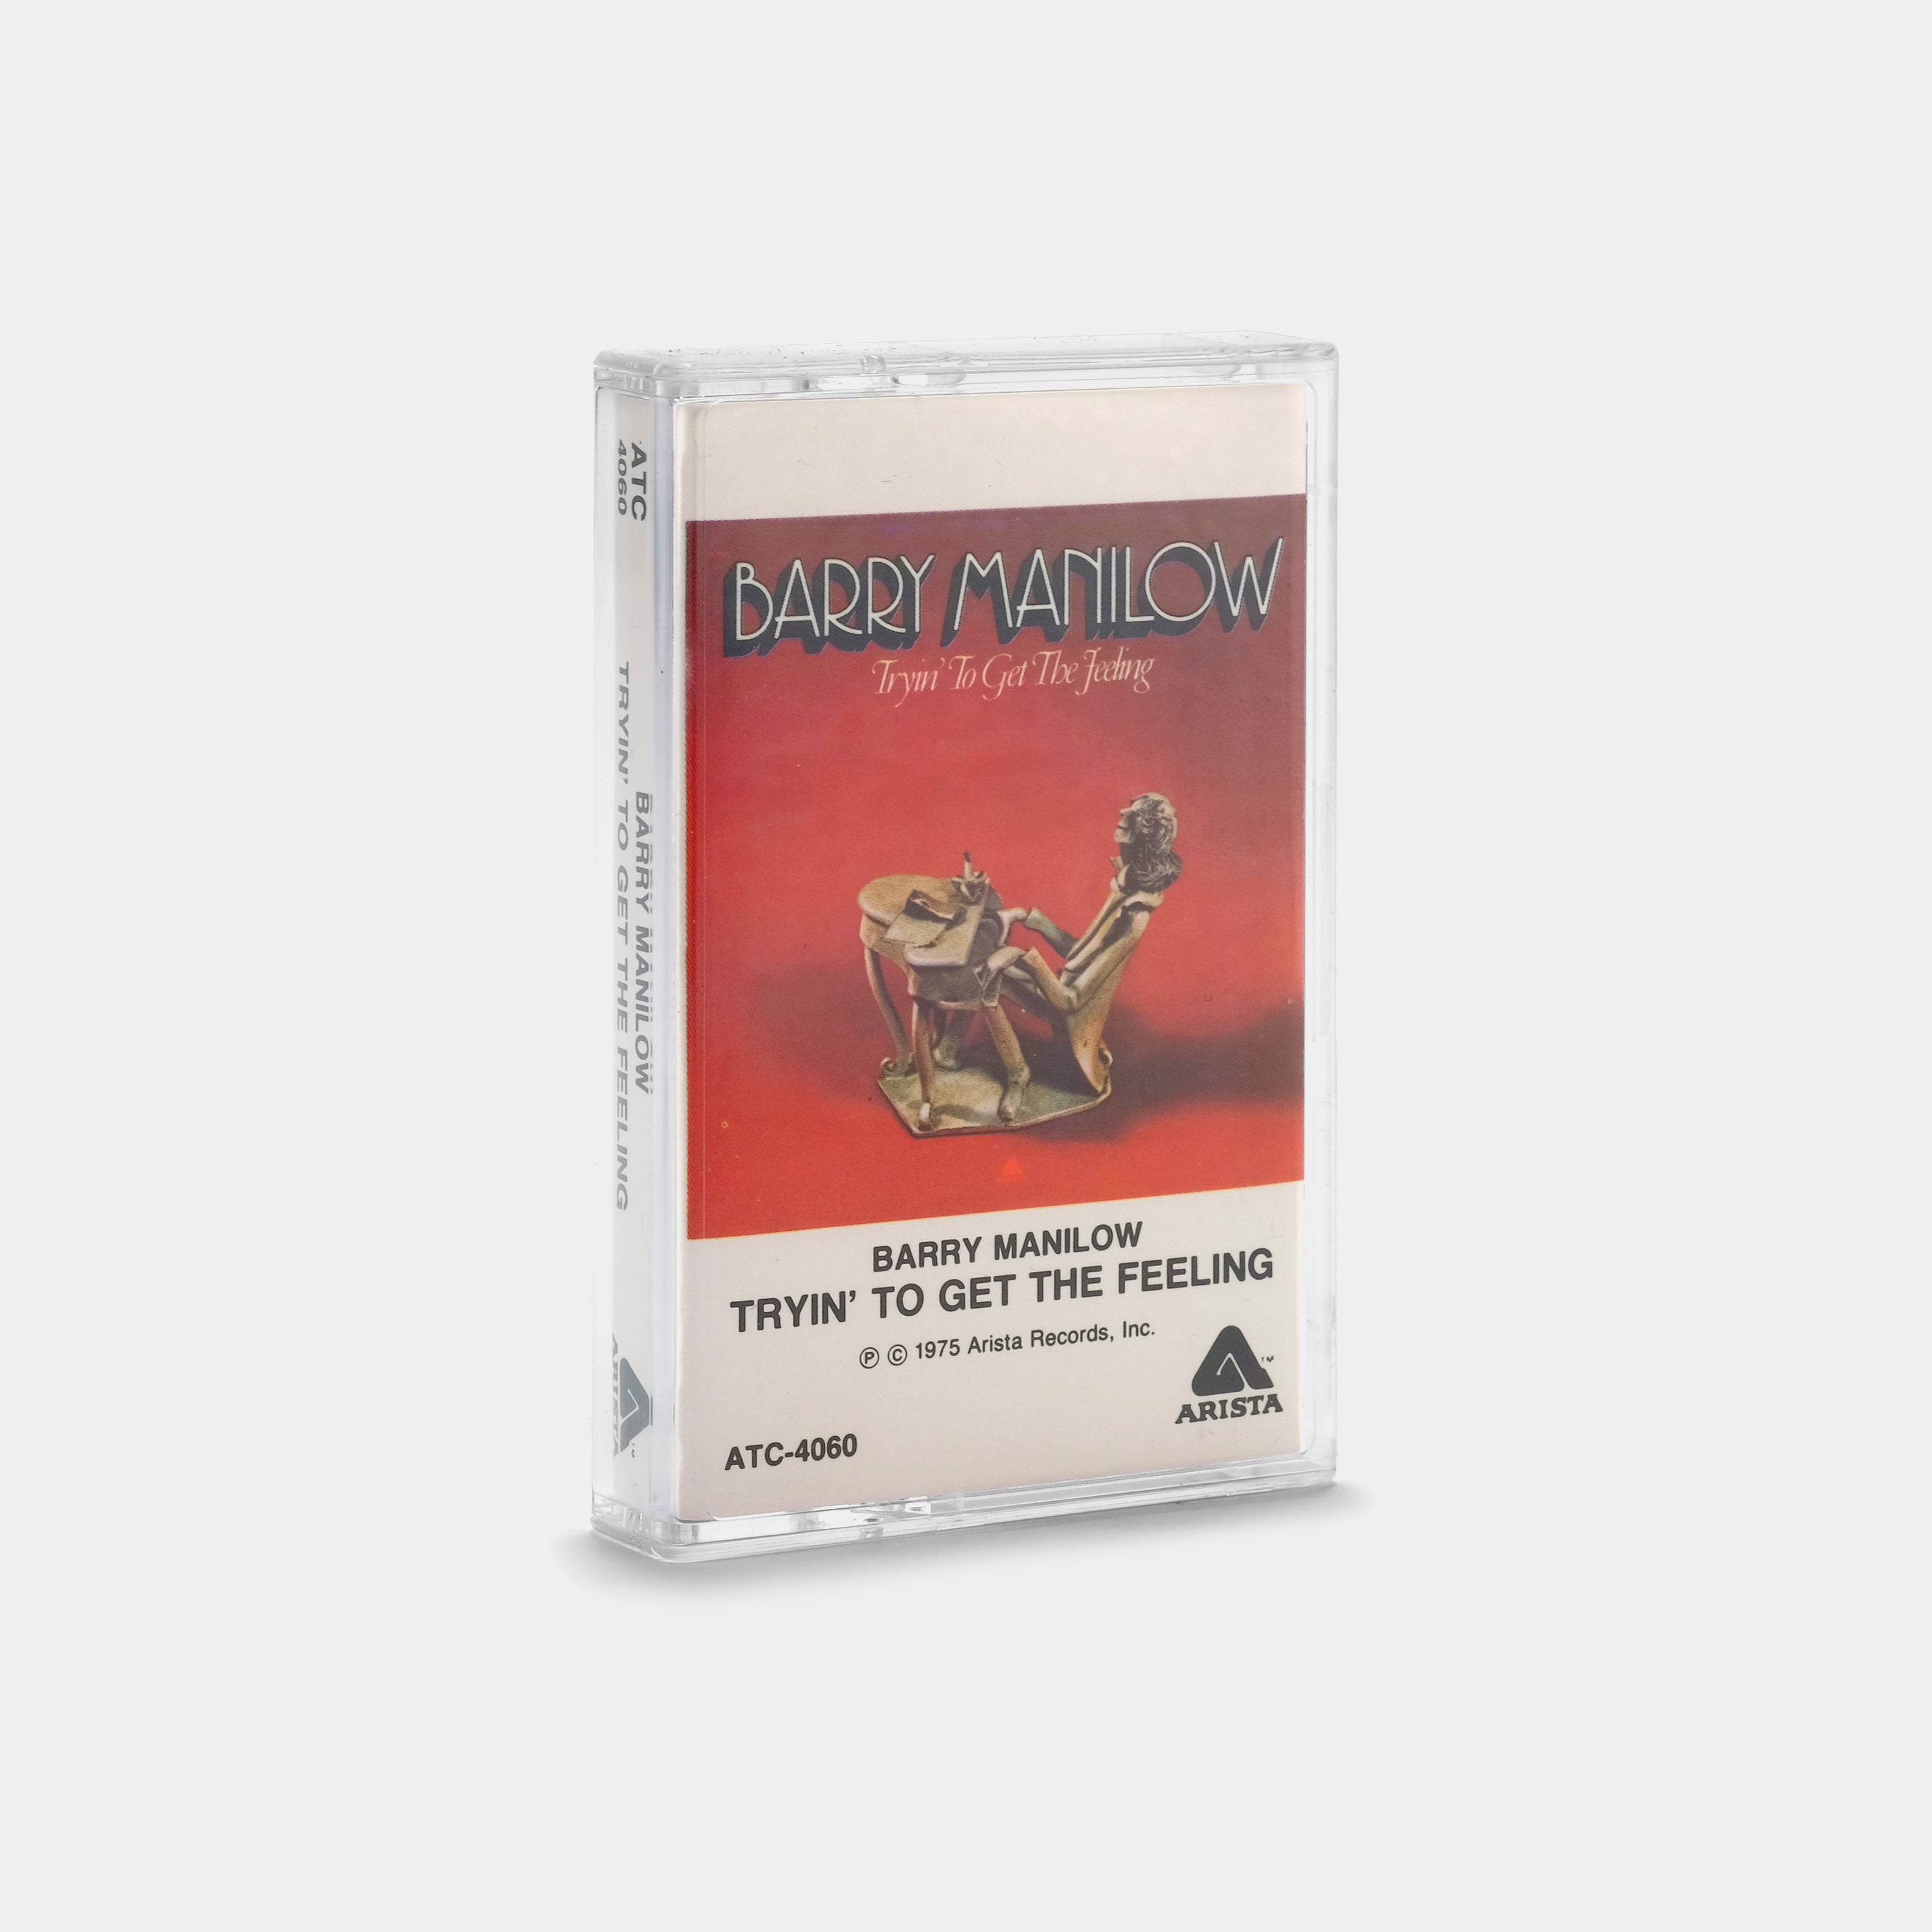 Barry Manilow - Tryin' To Get The Feeling Cassette Tape